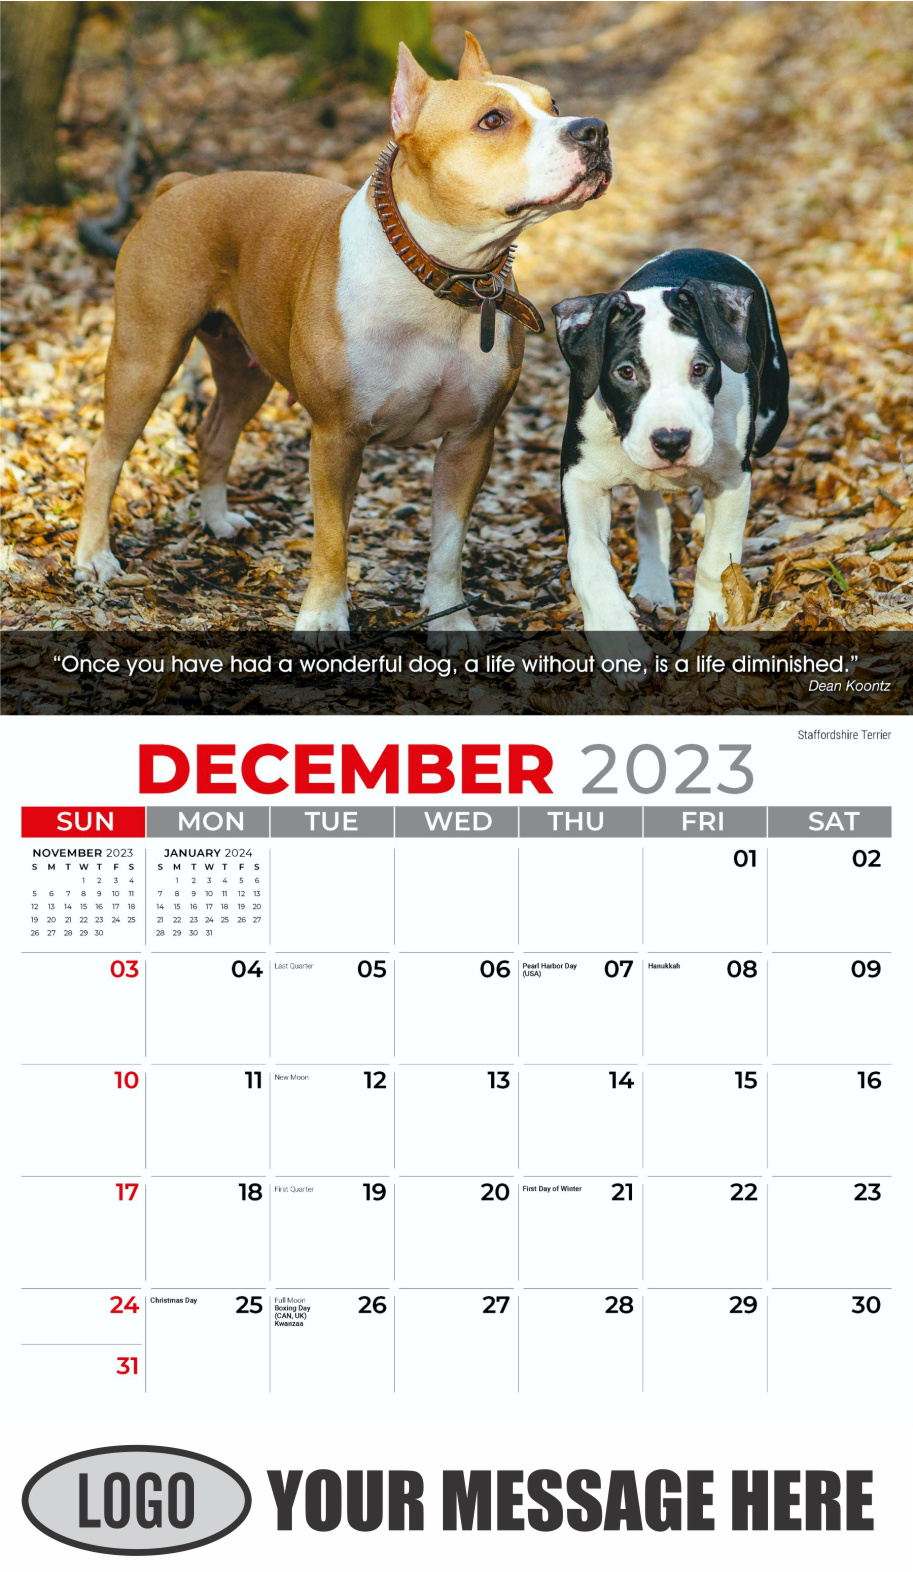 Dogs 2024 Vets and Pets Business Promotion Calendar - December_a